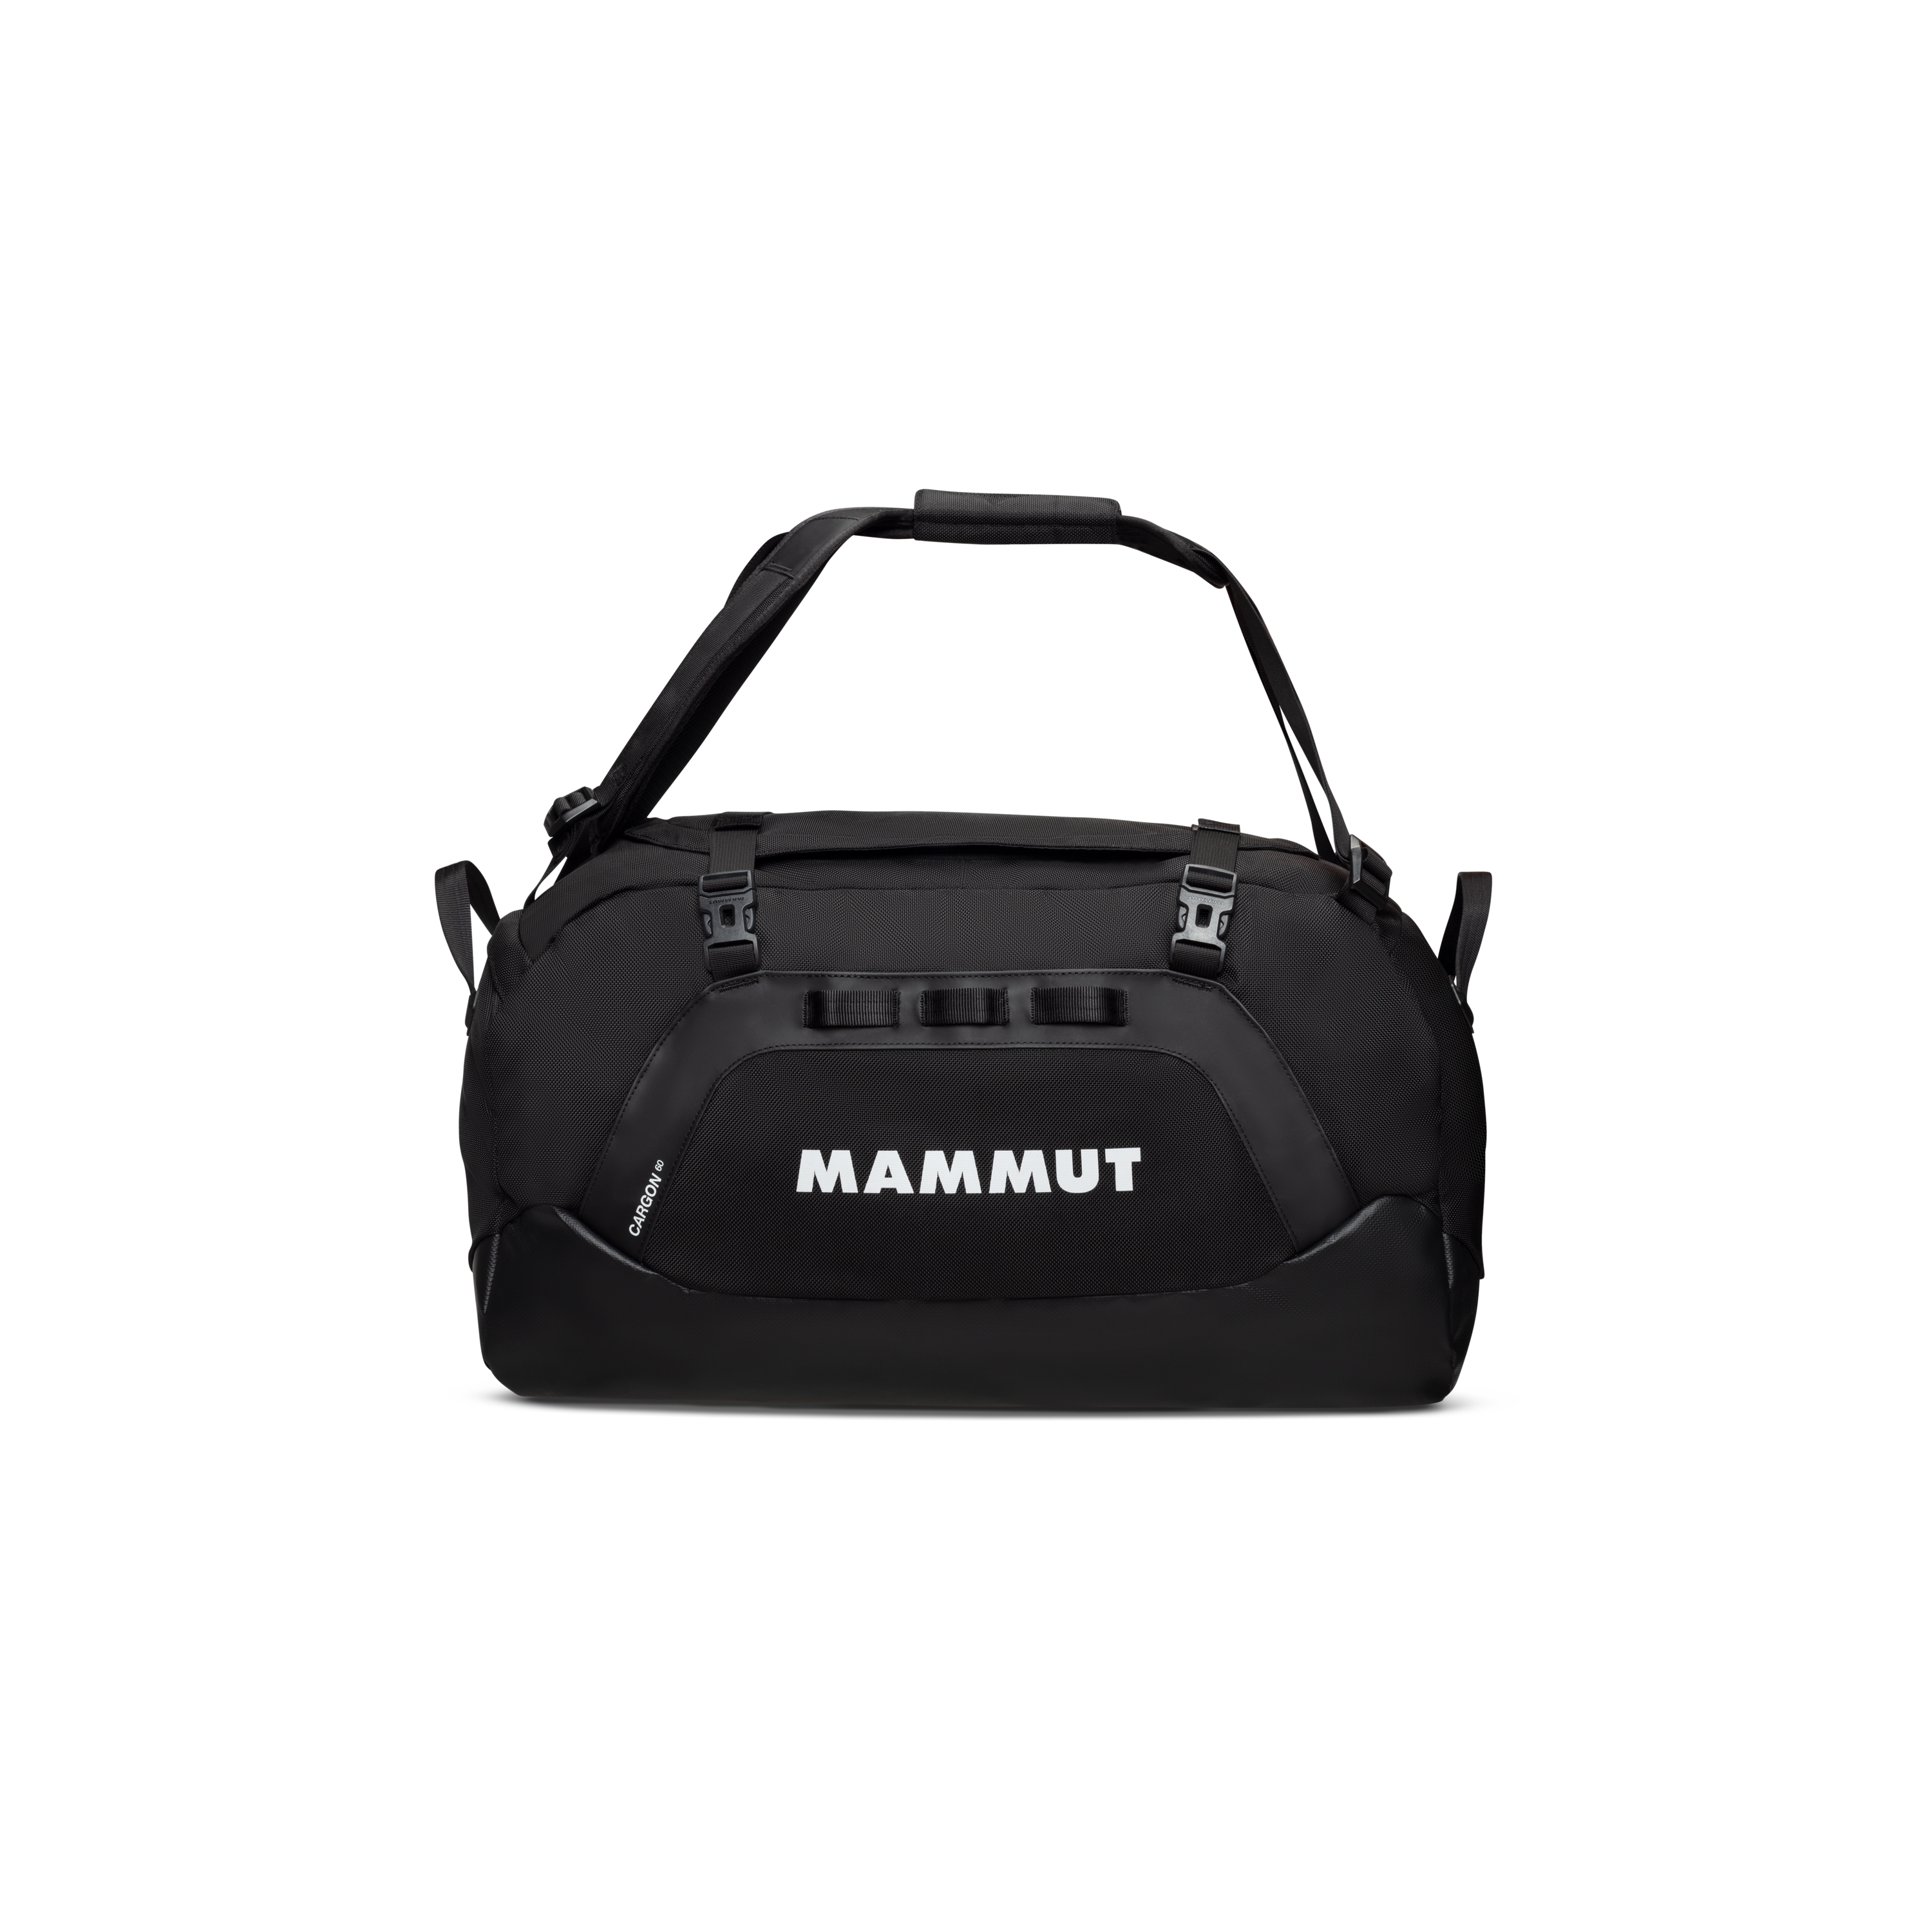 Mammut LMNT Rope Bag  Outdoor stores, sports, cycling, skiing